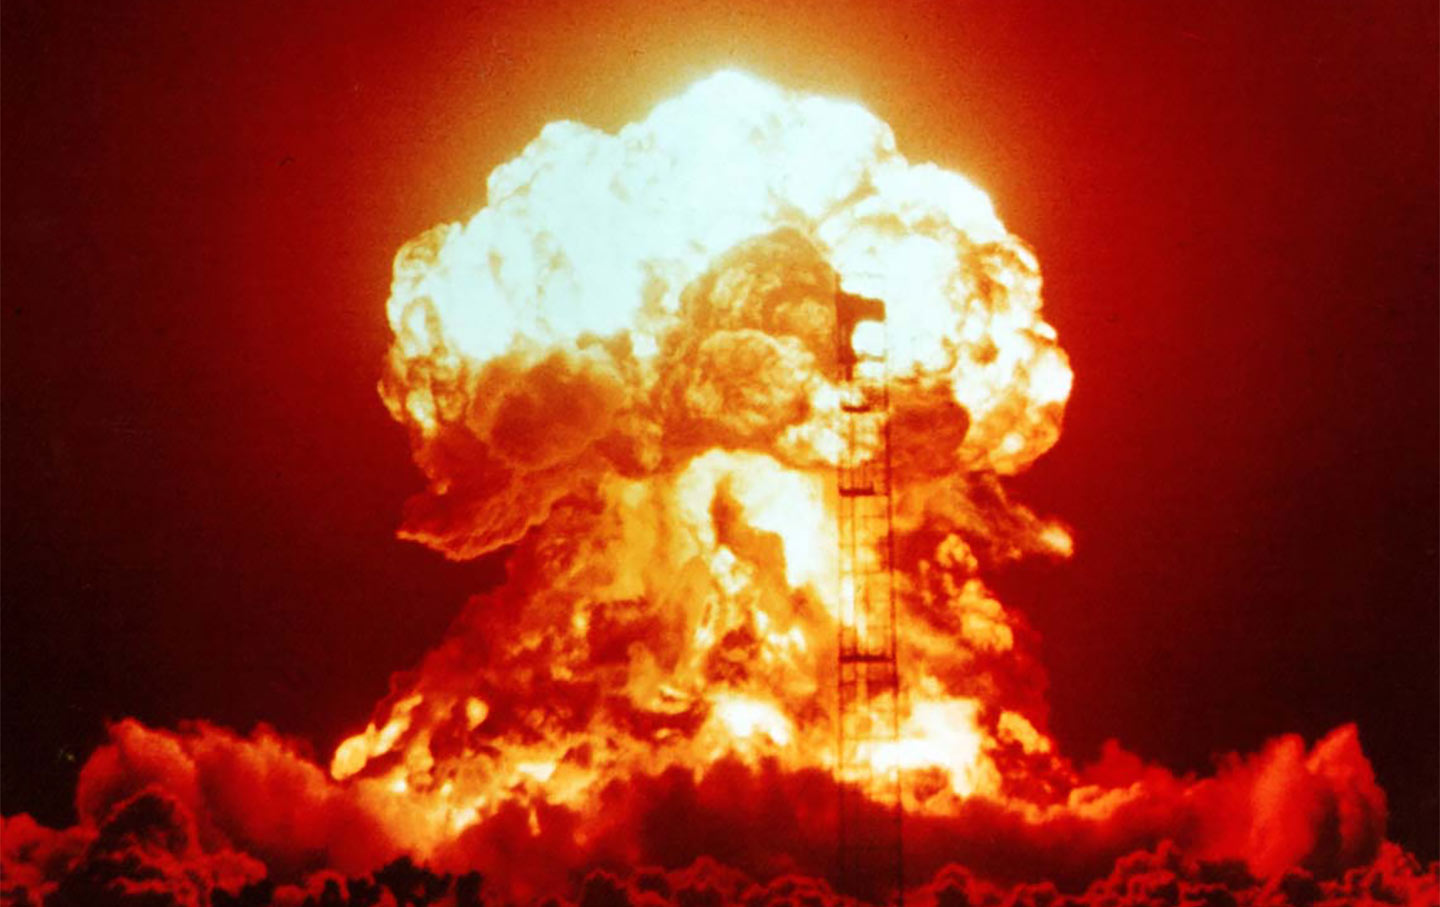 This nuclear explosion was carried out at the Nevada Test Site in 1953.